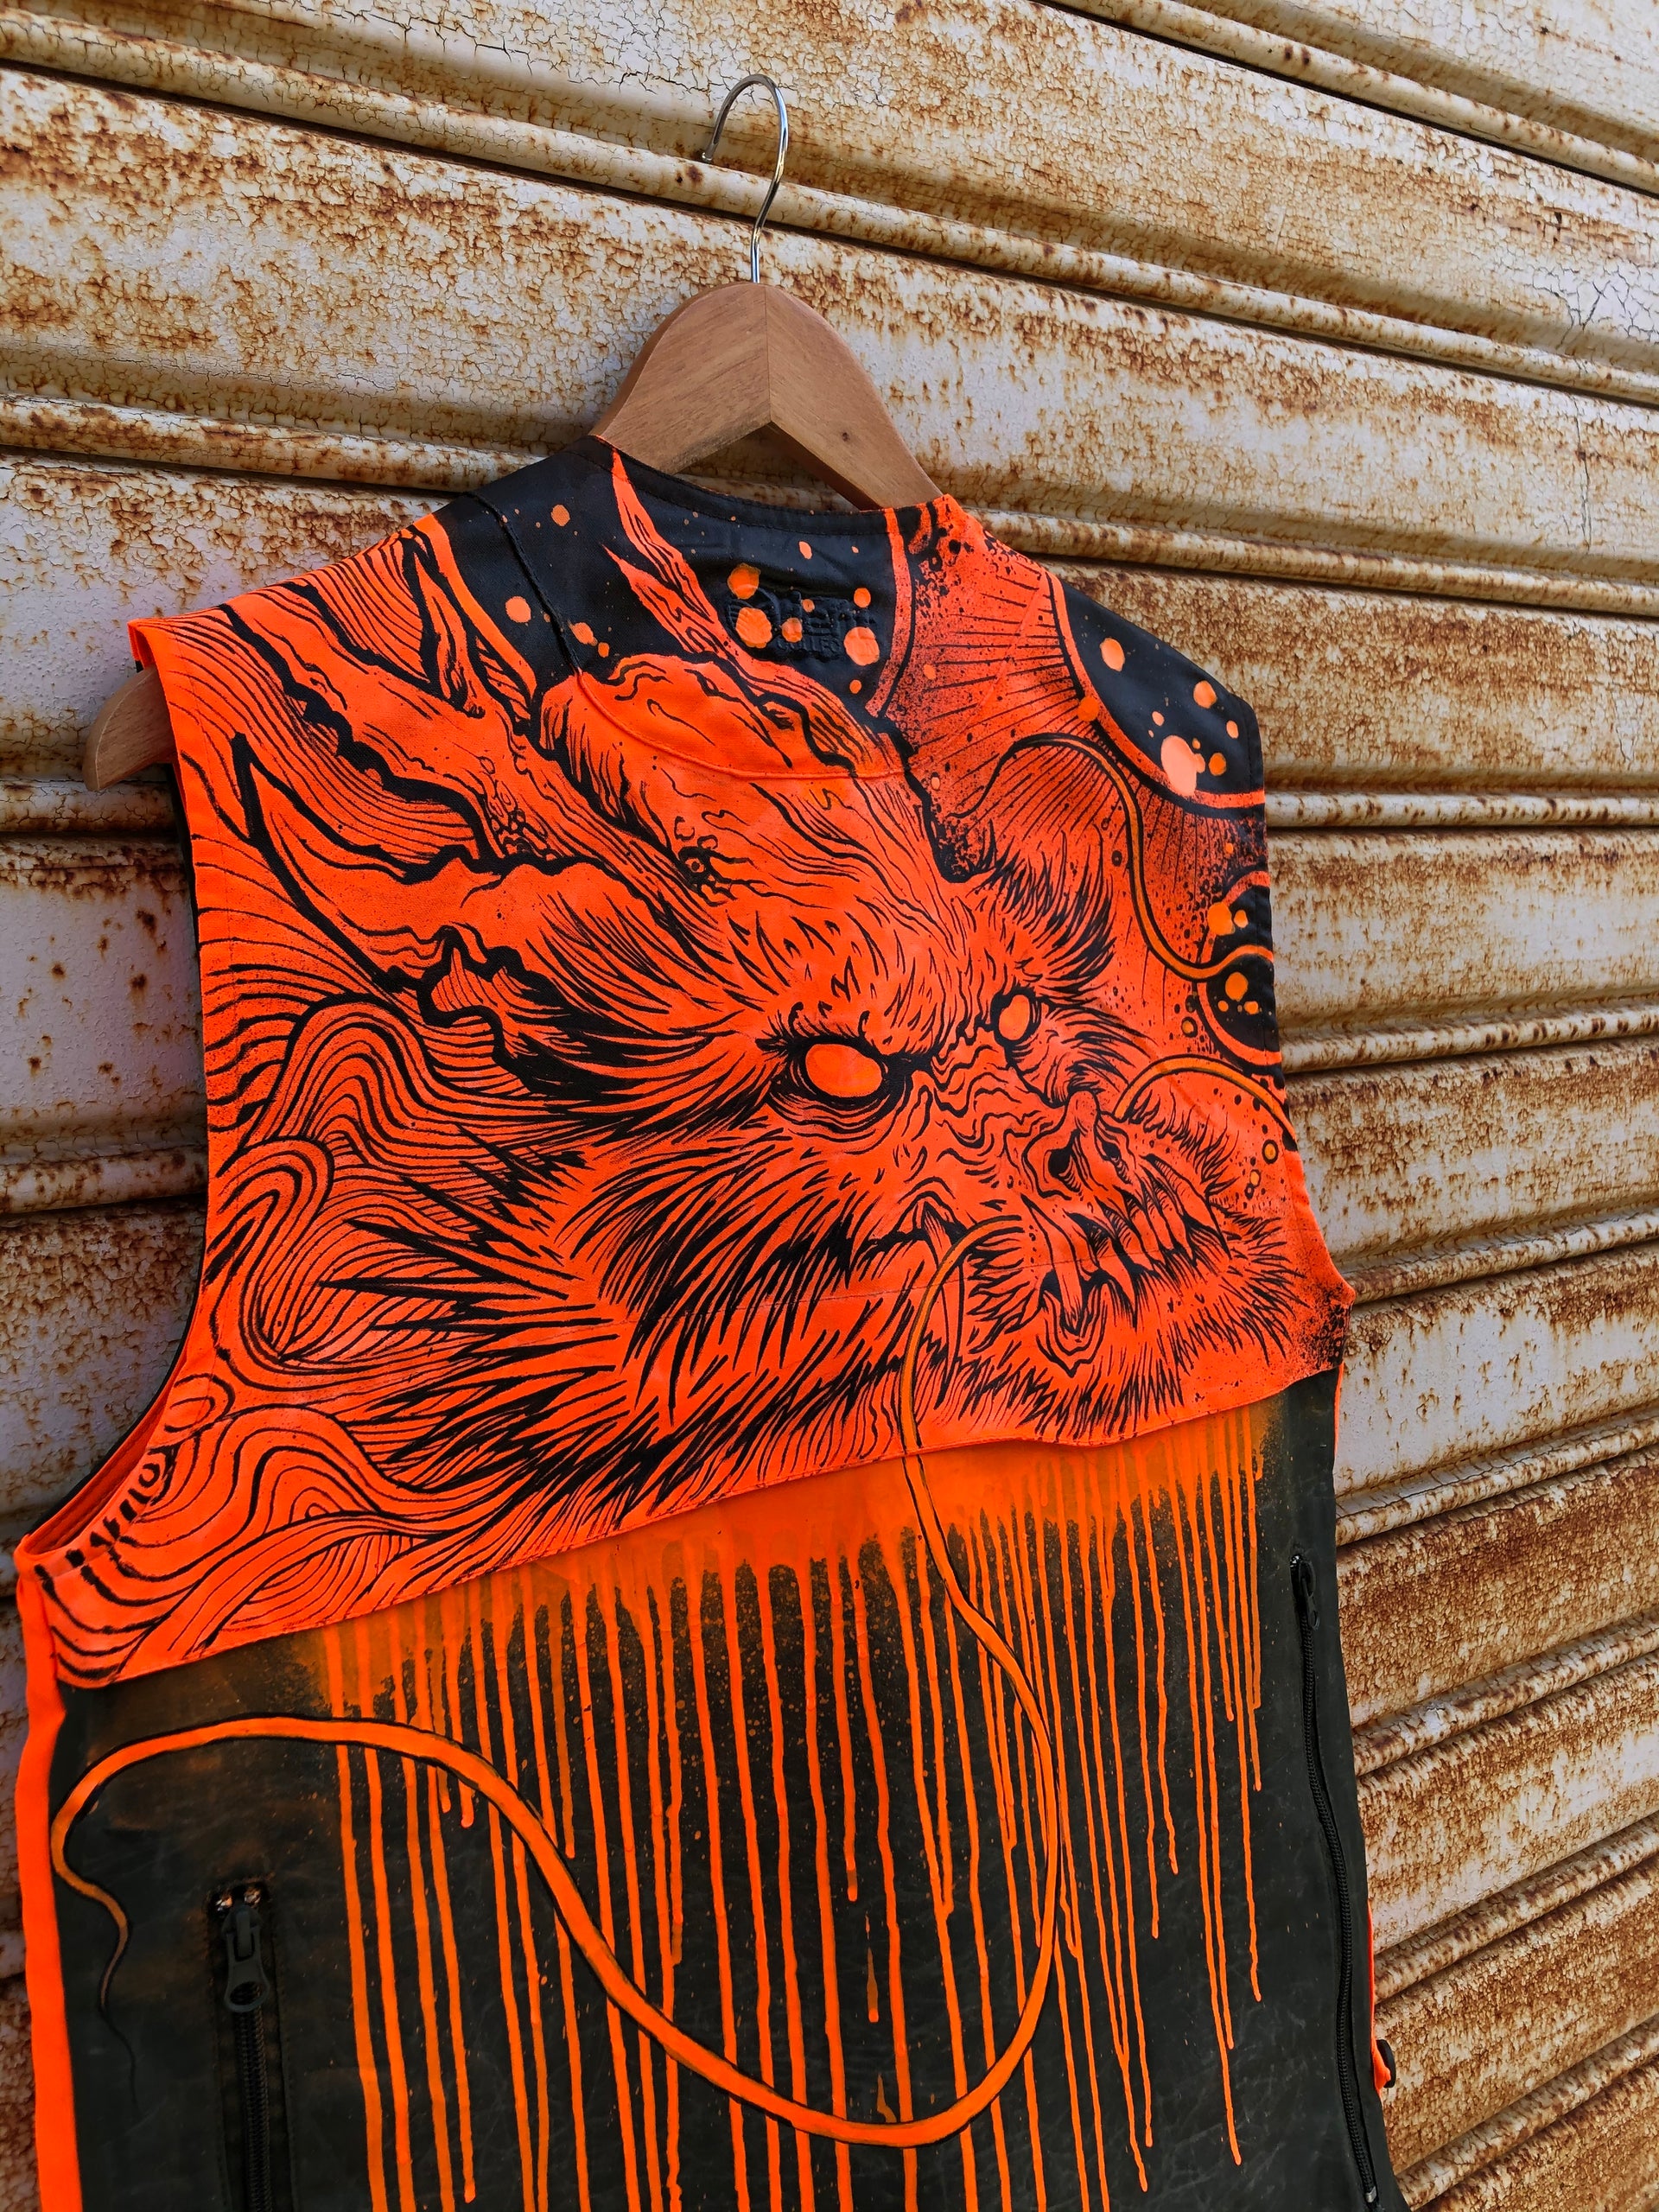 ONE PEACE "DRAGON" LIMITED EDITION DENIM VEST - SOLD OUT -